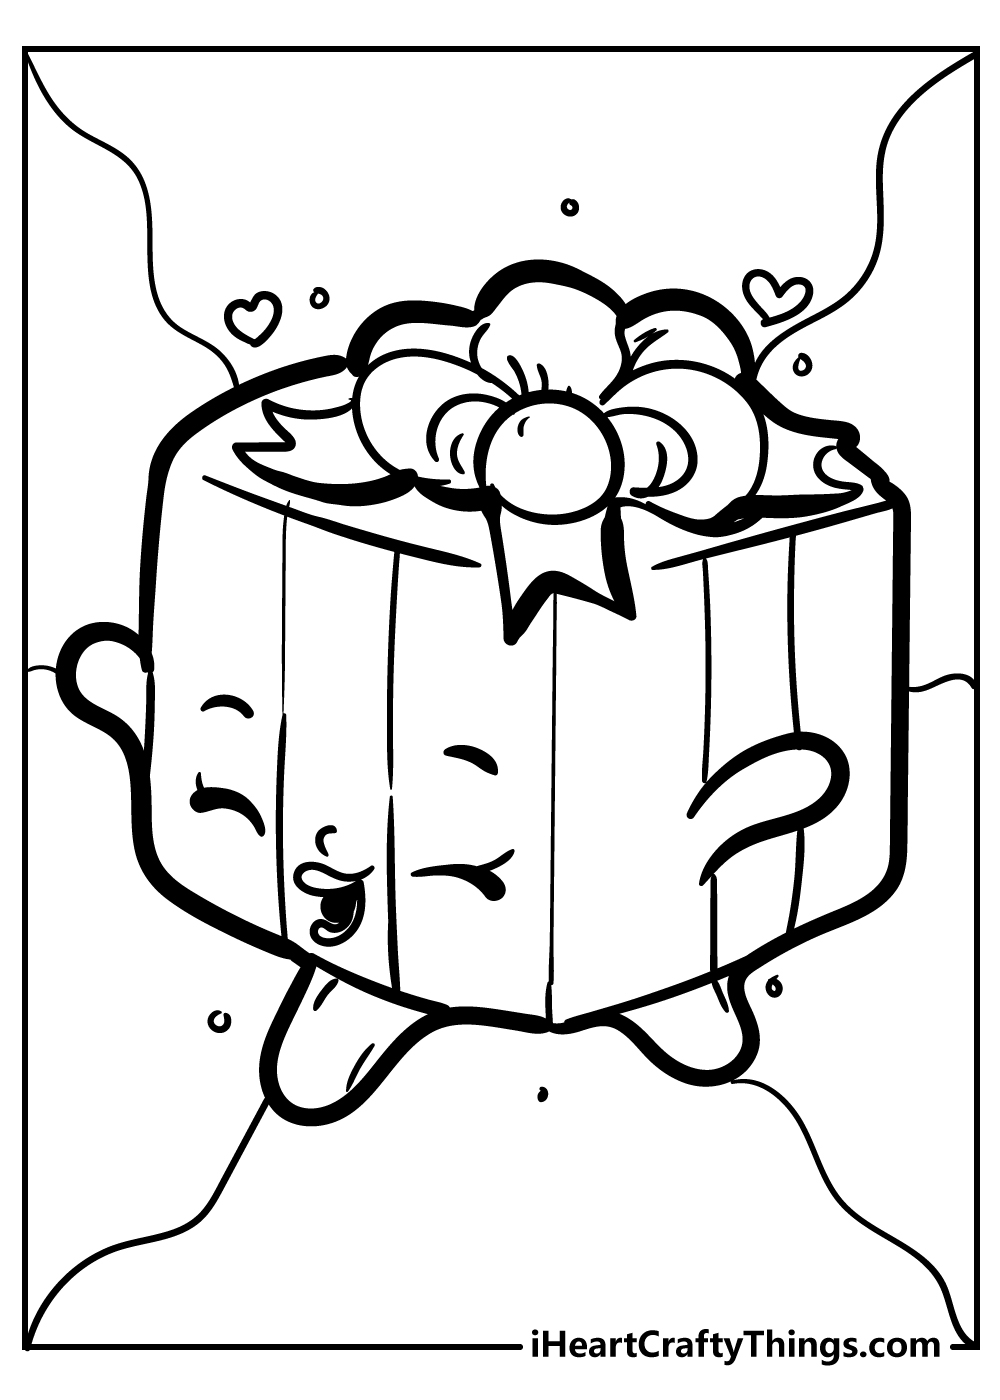 miss pressy shopkins coloring pages free download